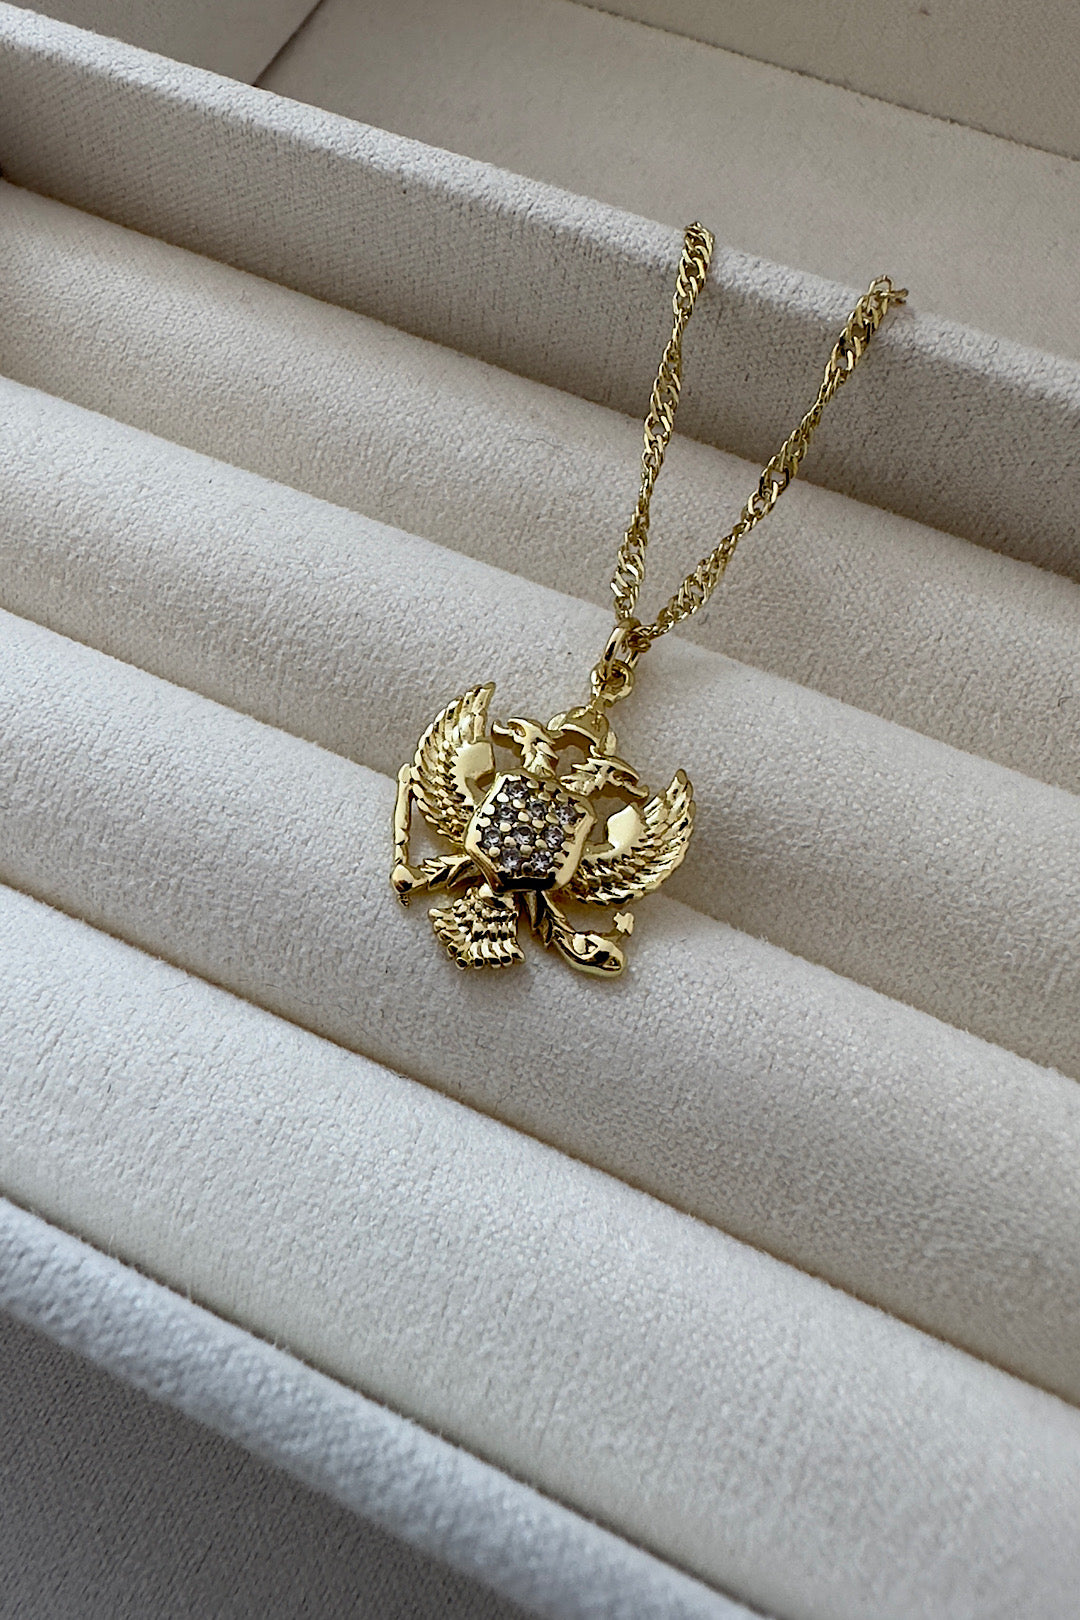 Montenegro Coat of arms Gold Swirl Necklace 